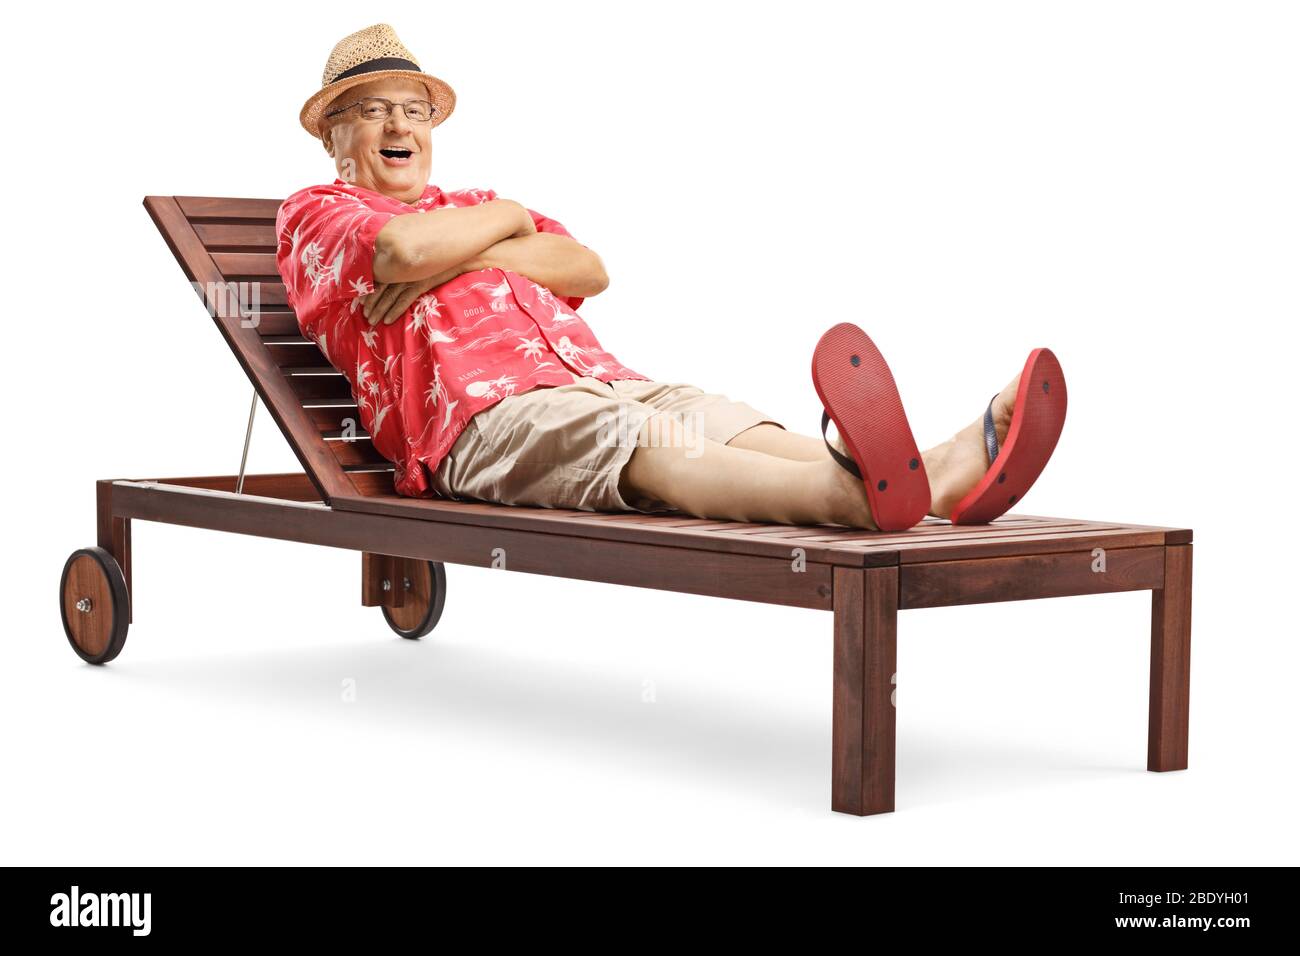 Elderly man lying on a wooden sunbed isolated on white background Stock Photo